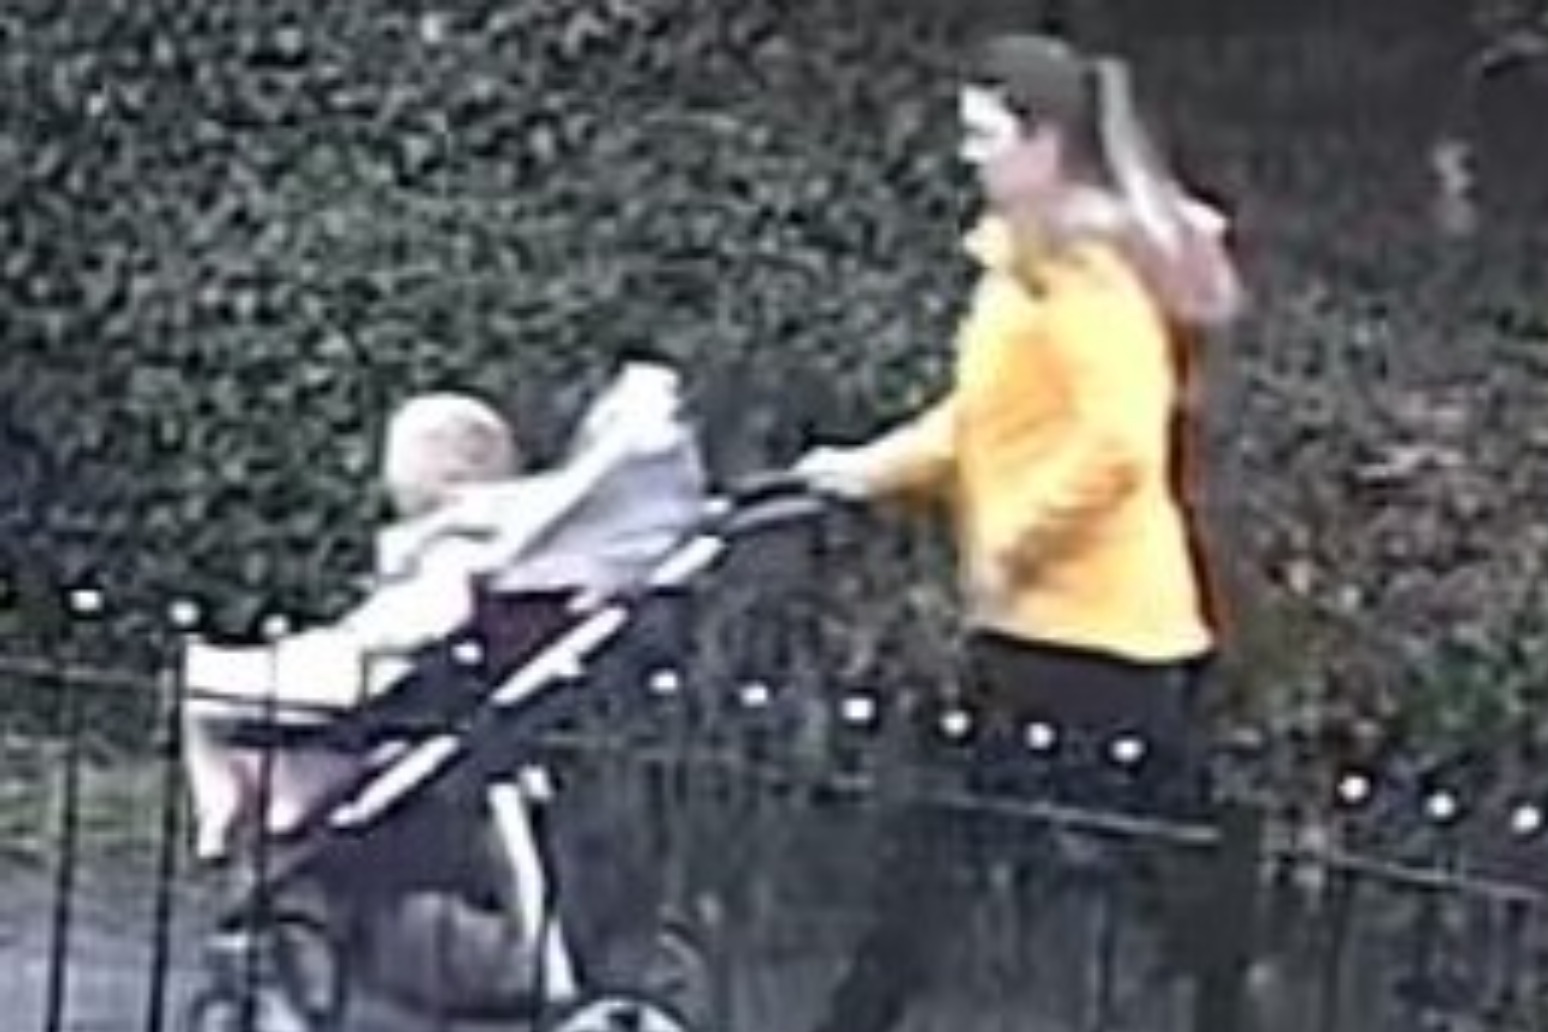 Police search for woman with pram in case of missing dog walker Nicola Bulley 